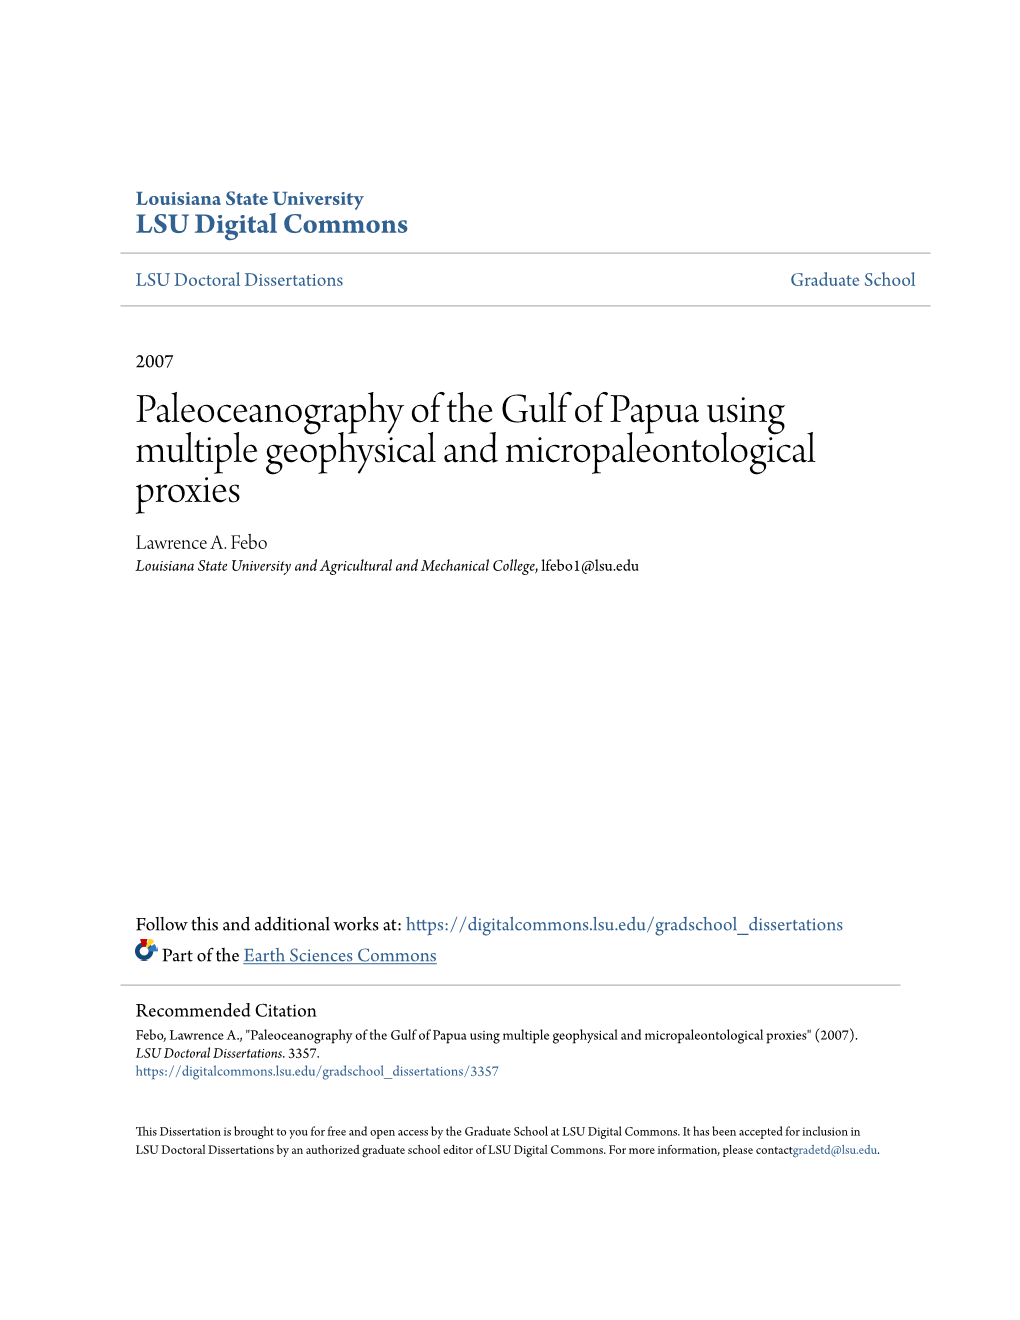 Paleoceanography of the Gulf of Papua Using Multiple Geophysical and Micropaleontological Proxies Lawrence A